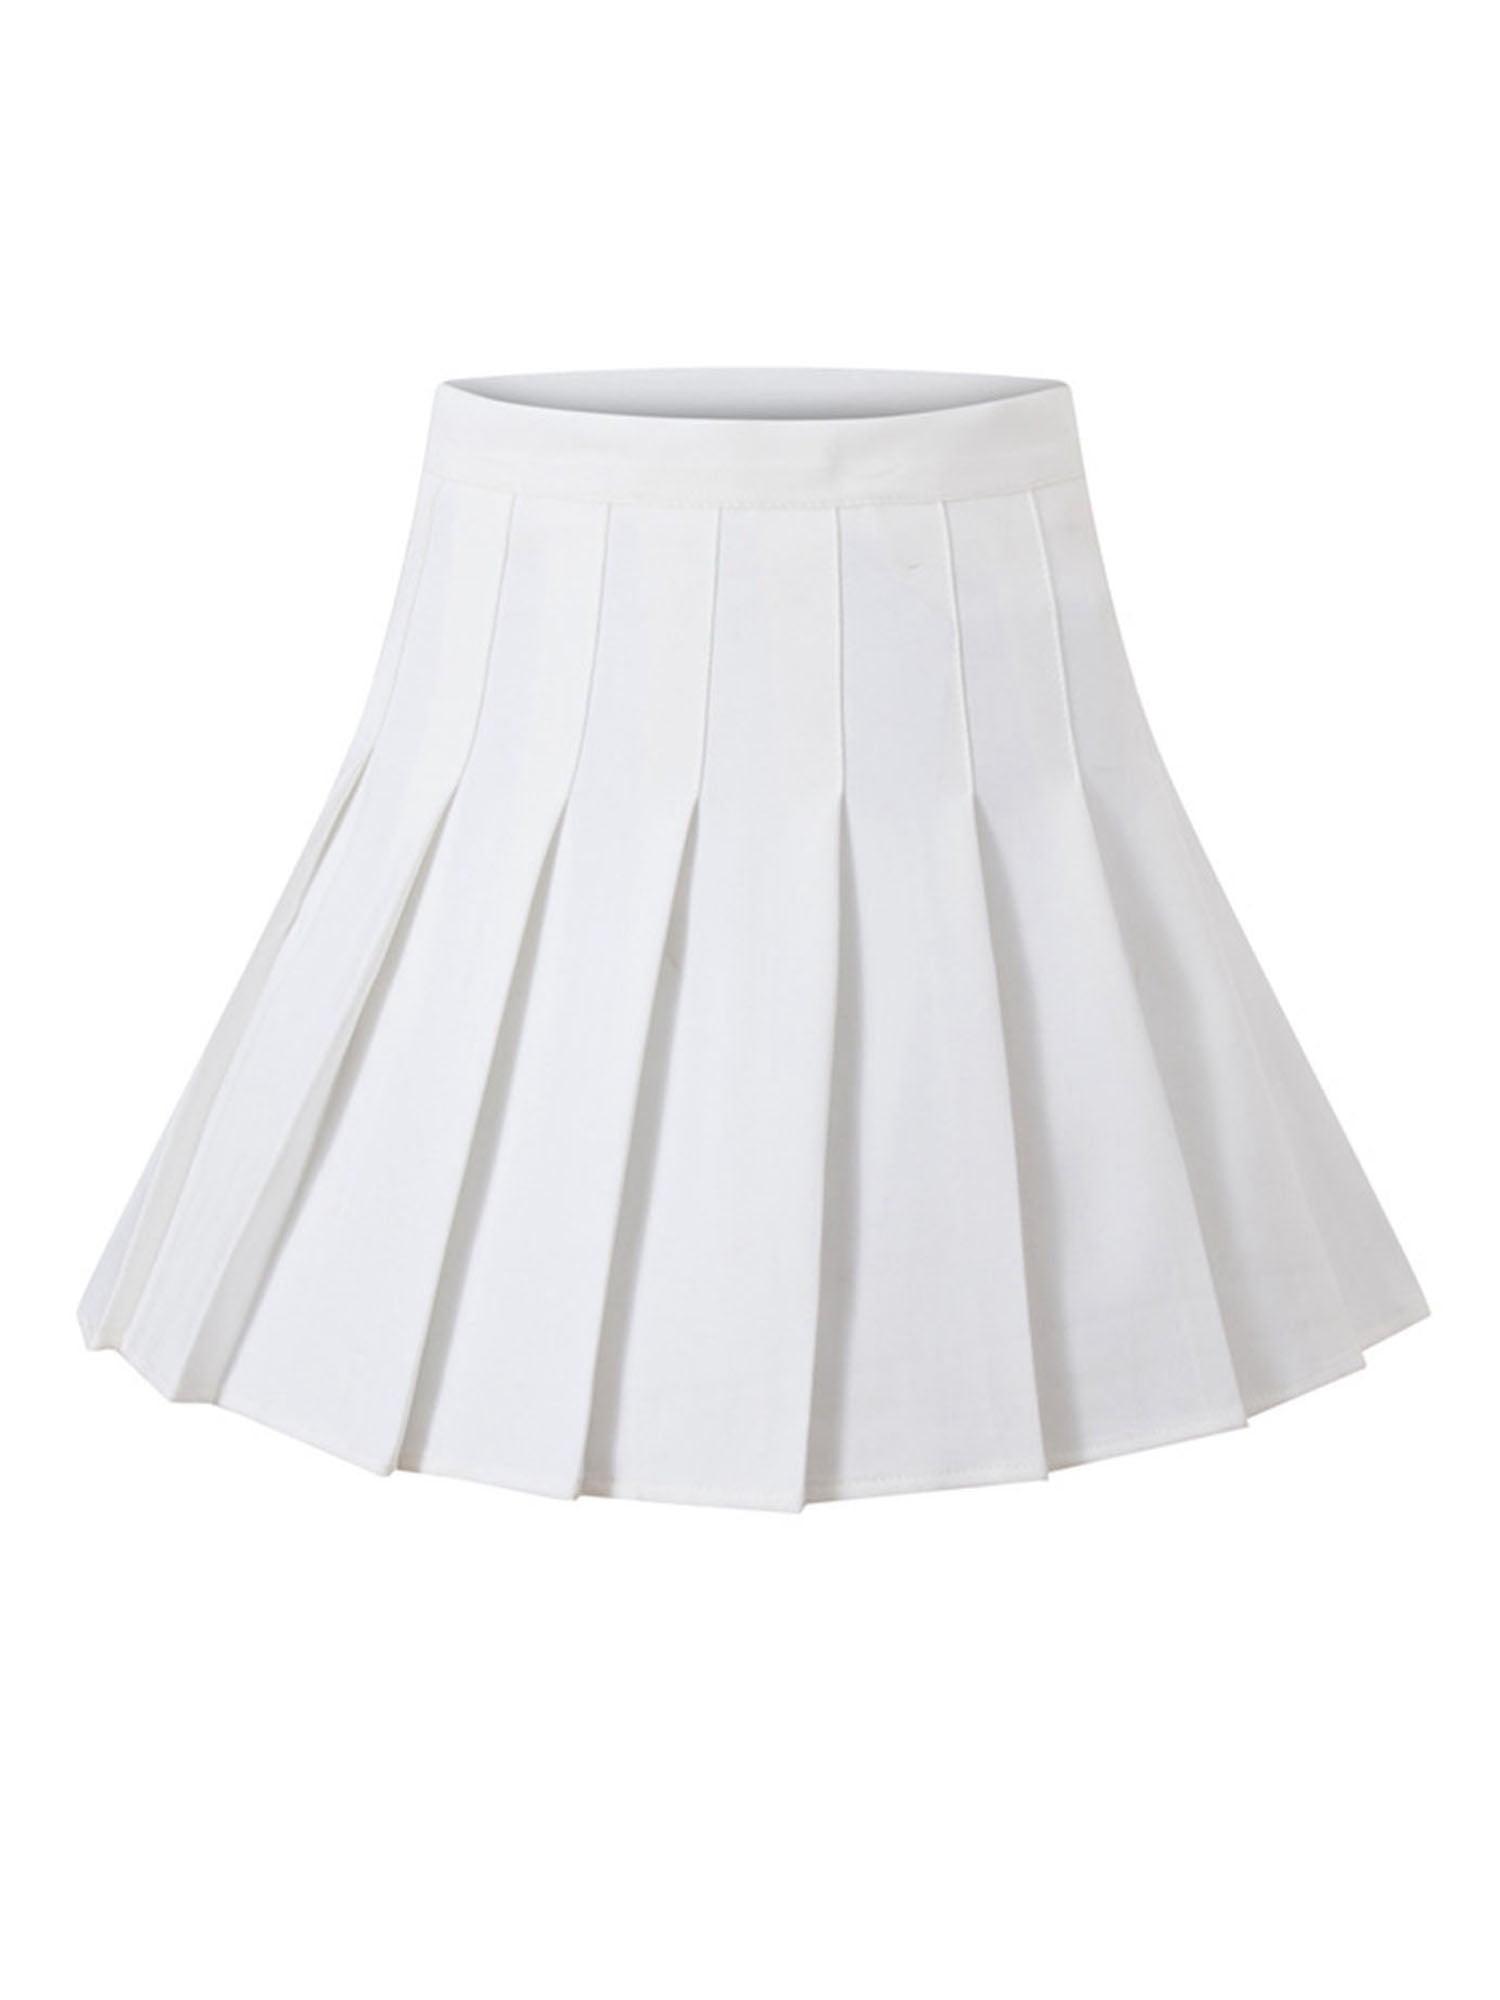 Buy Rohan Uniforms Plain School Uniform White Cotton Skirts for Girls - XXL  with Length 30-36 Inches at Amazon.in